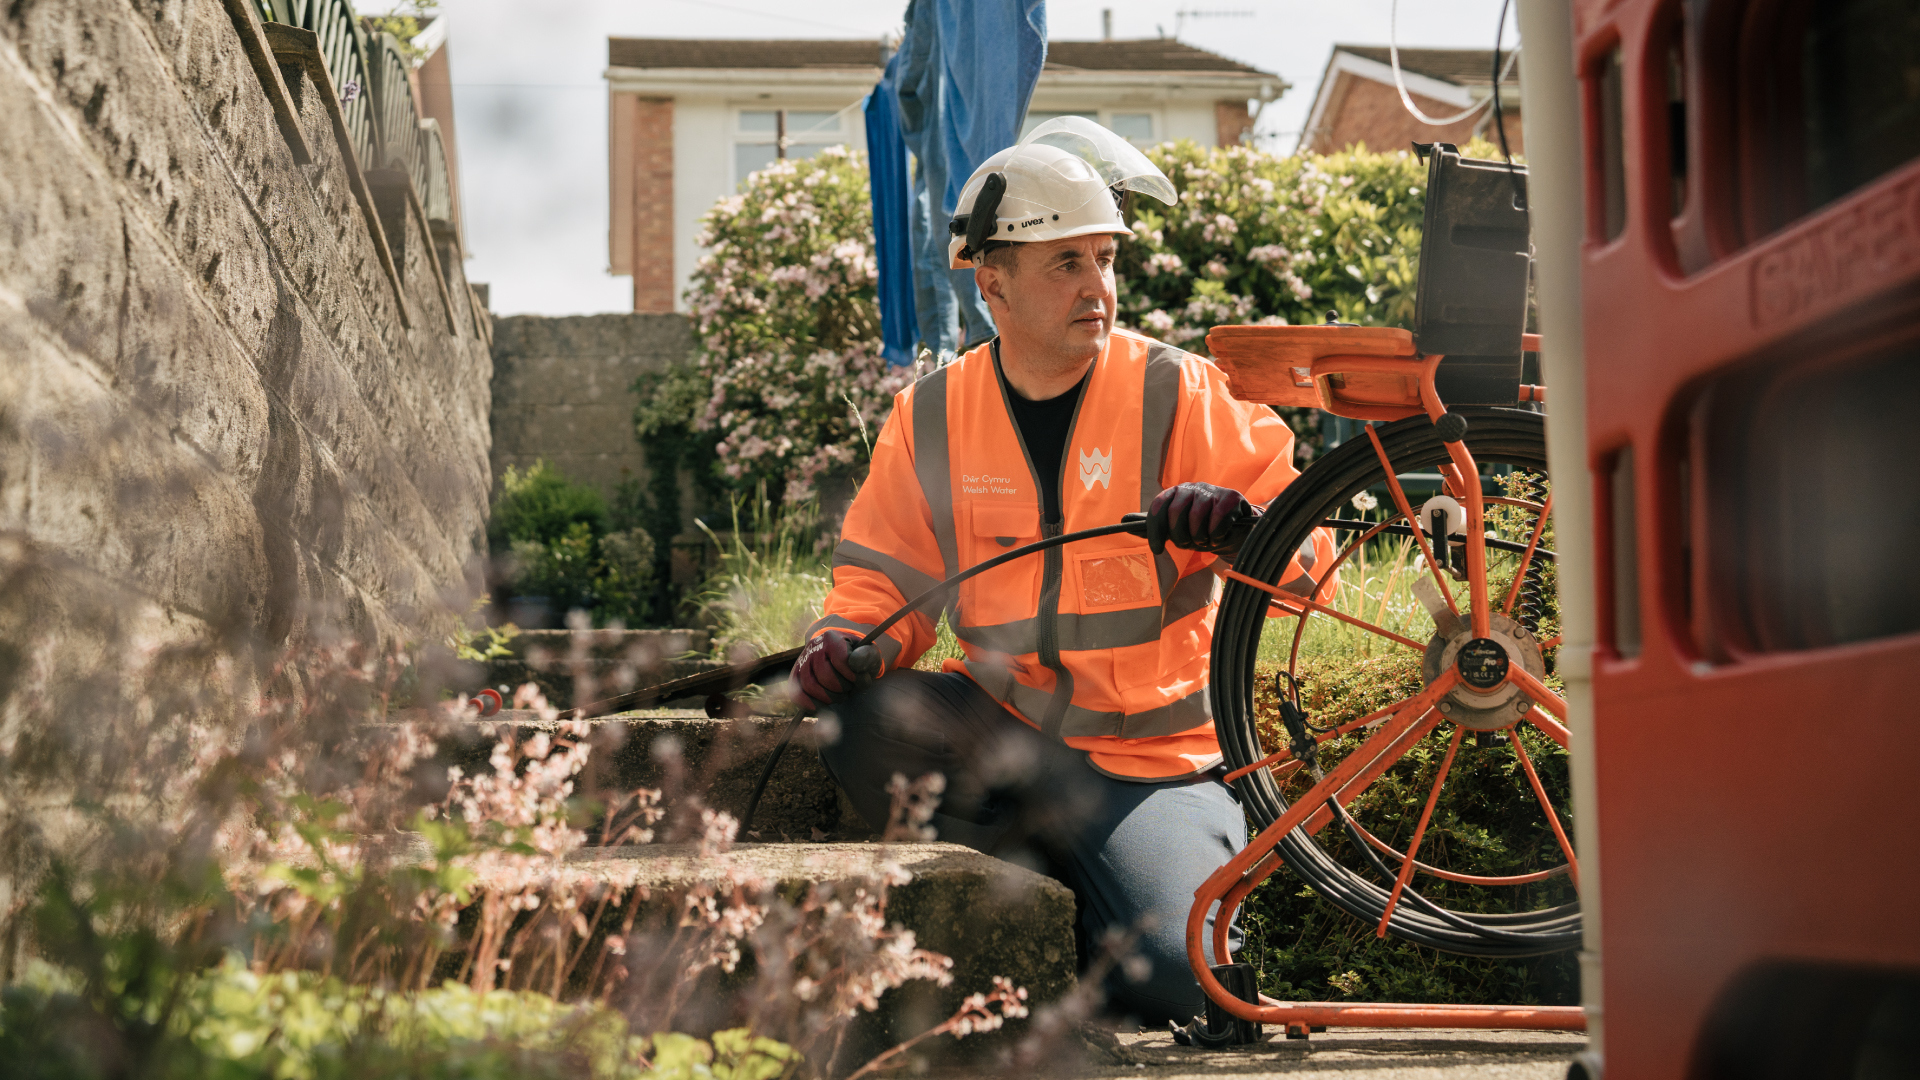 Welsh water employee working at a residence